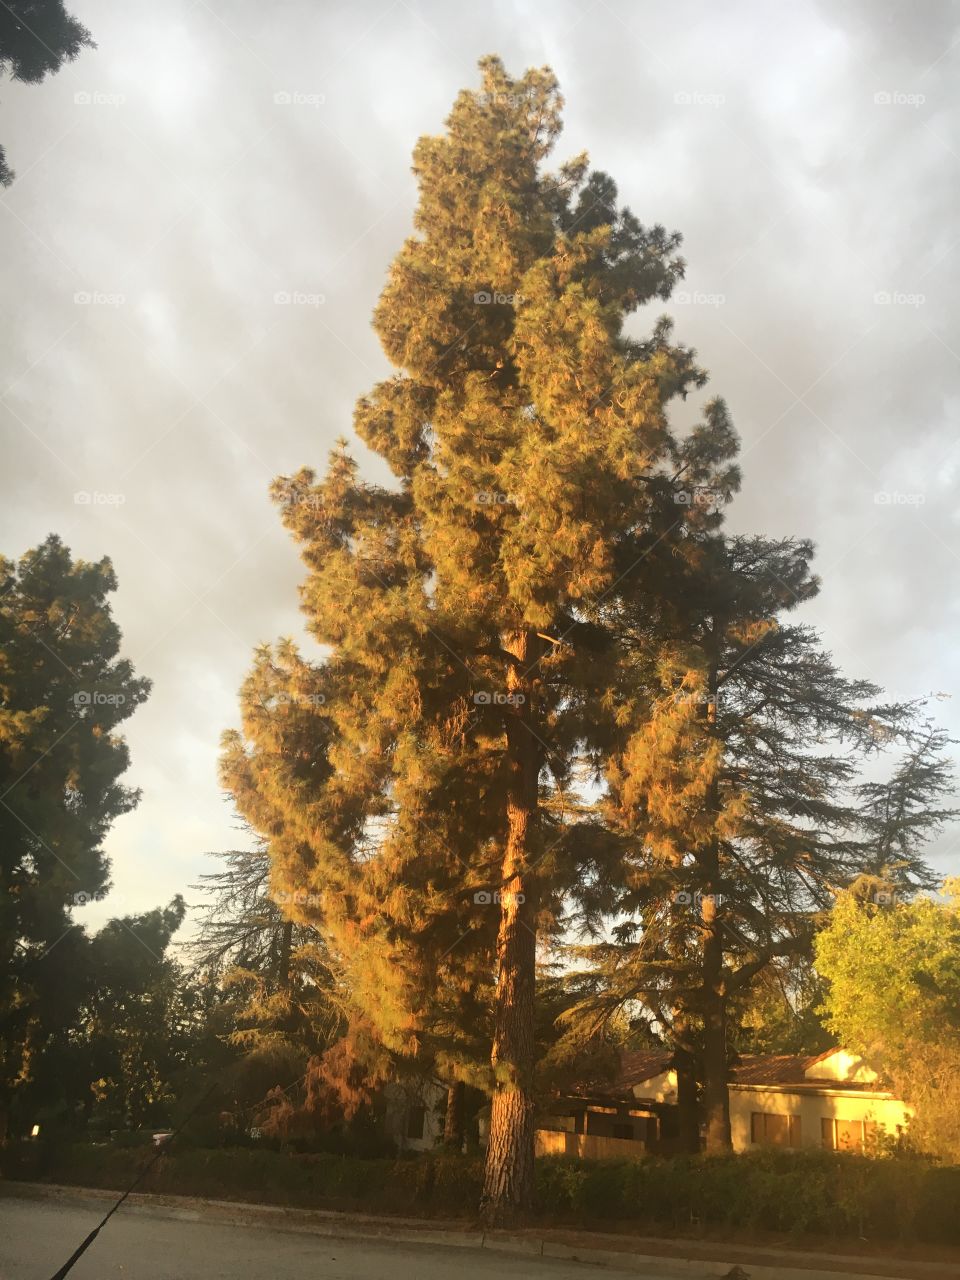 A tree lit by golden sunlight in front of a gray, cloudy sky. 